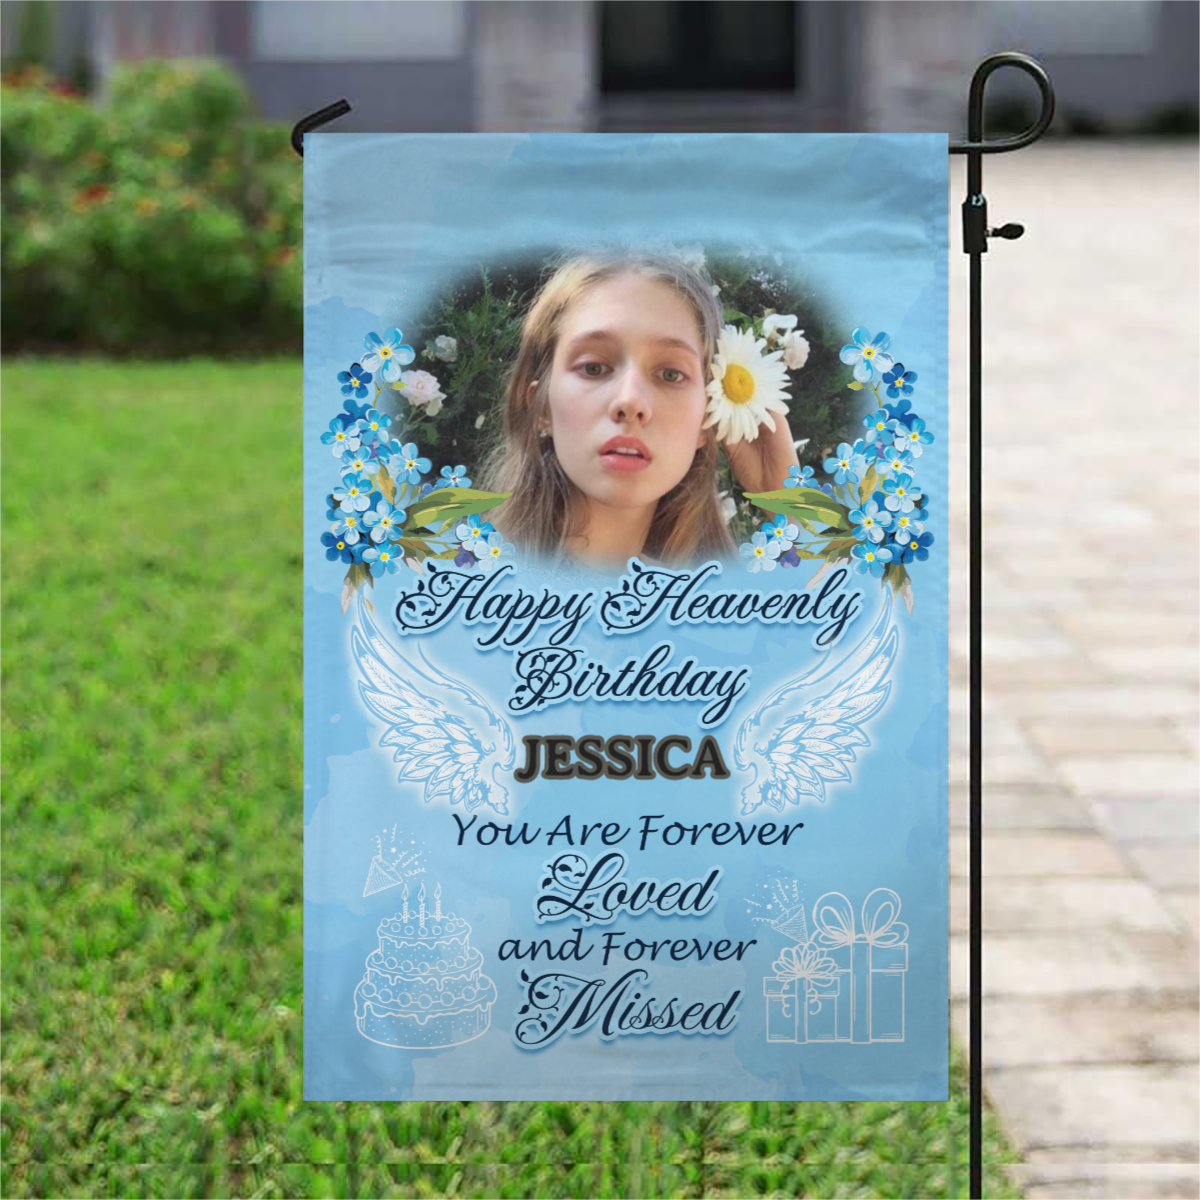 Happy Heavenly Personalized Photo Memorial Garden & House Flag